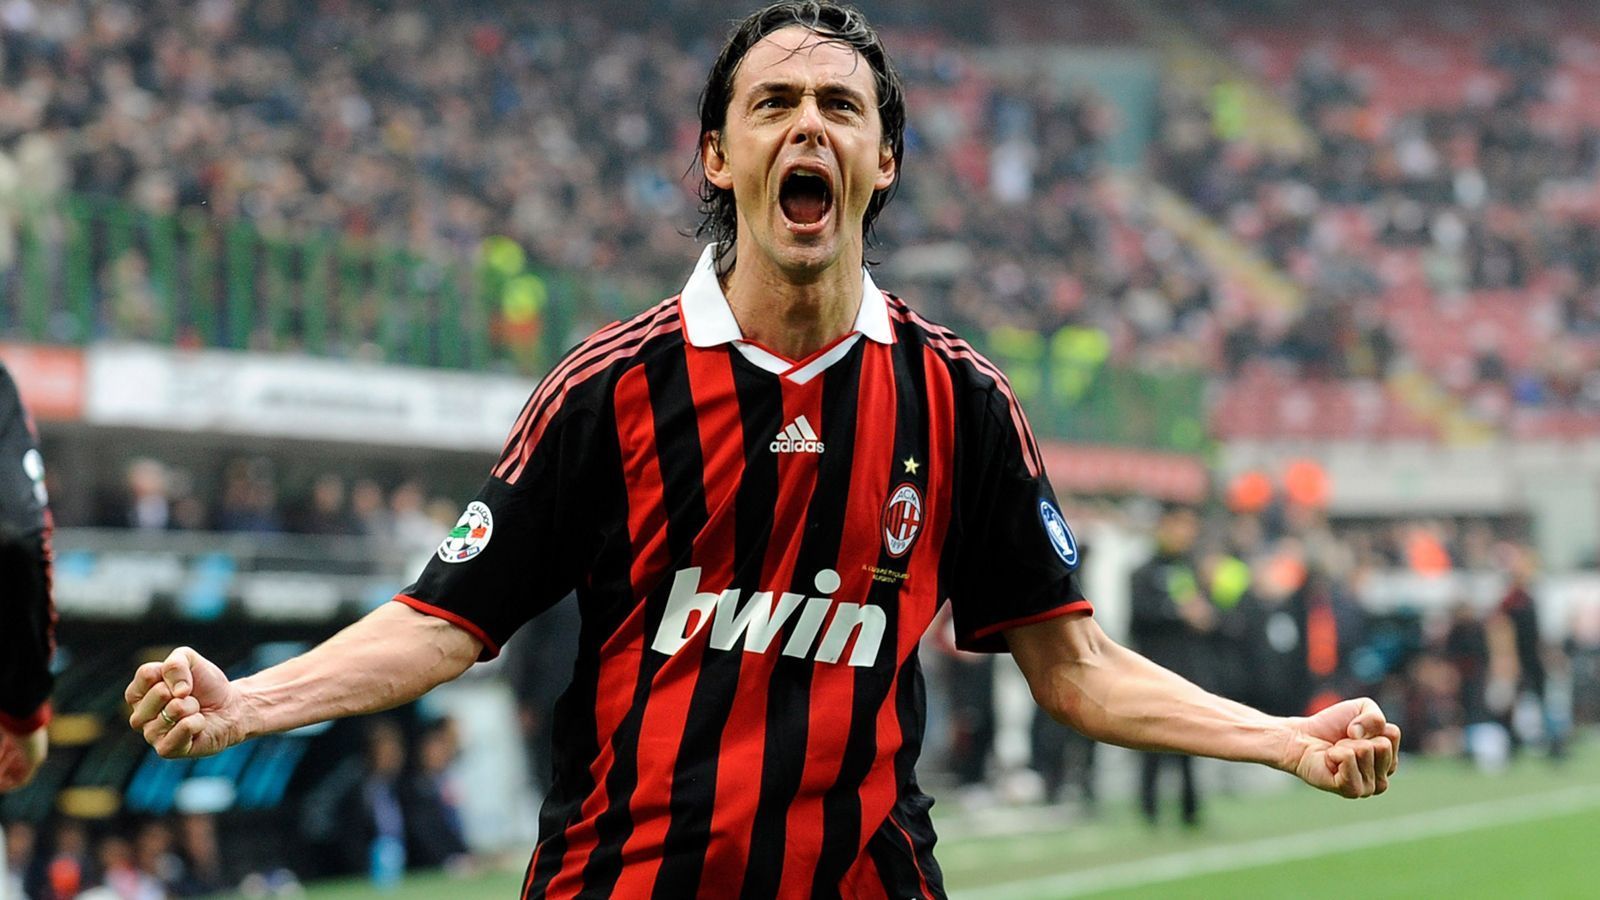 
                <strong>Filippo Inzaghi</strong><br>
                Hattricks in der Champions League: 3
              